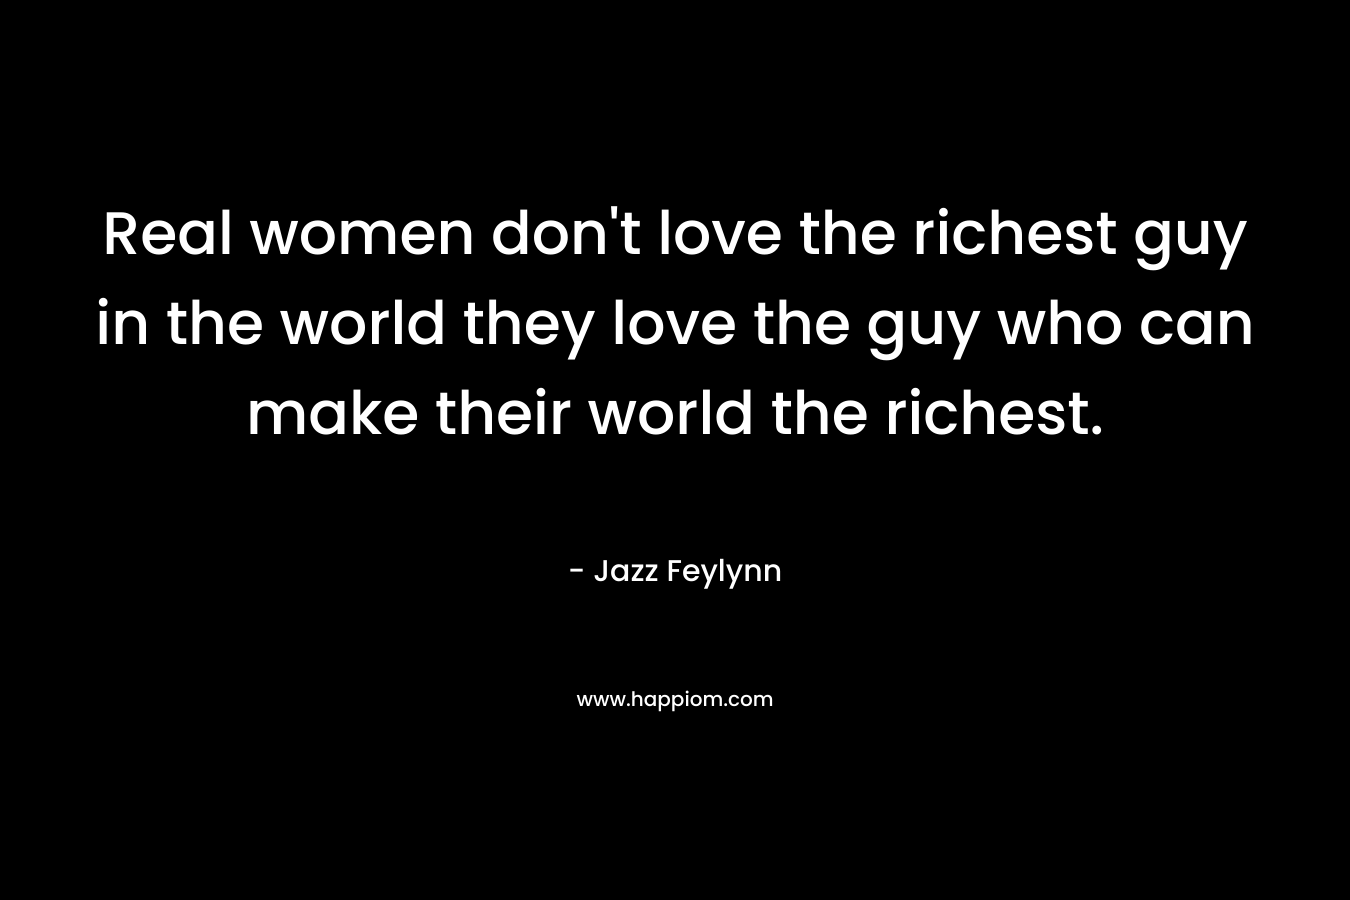 Real women don’t love the richest guy in the world they love the guy who can make their world the richest. – Jazz Feylynn